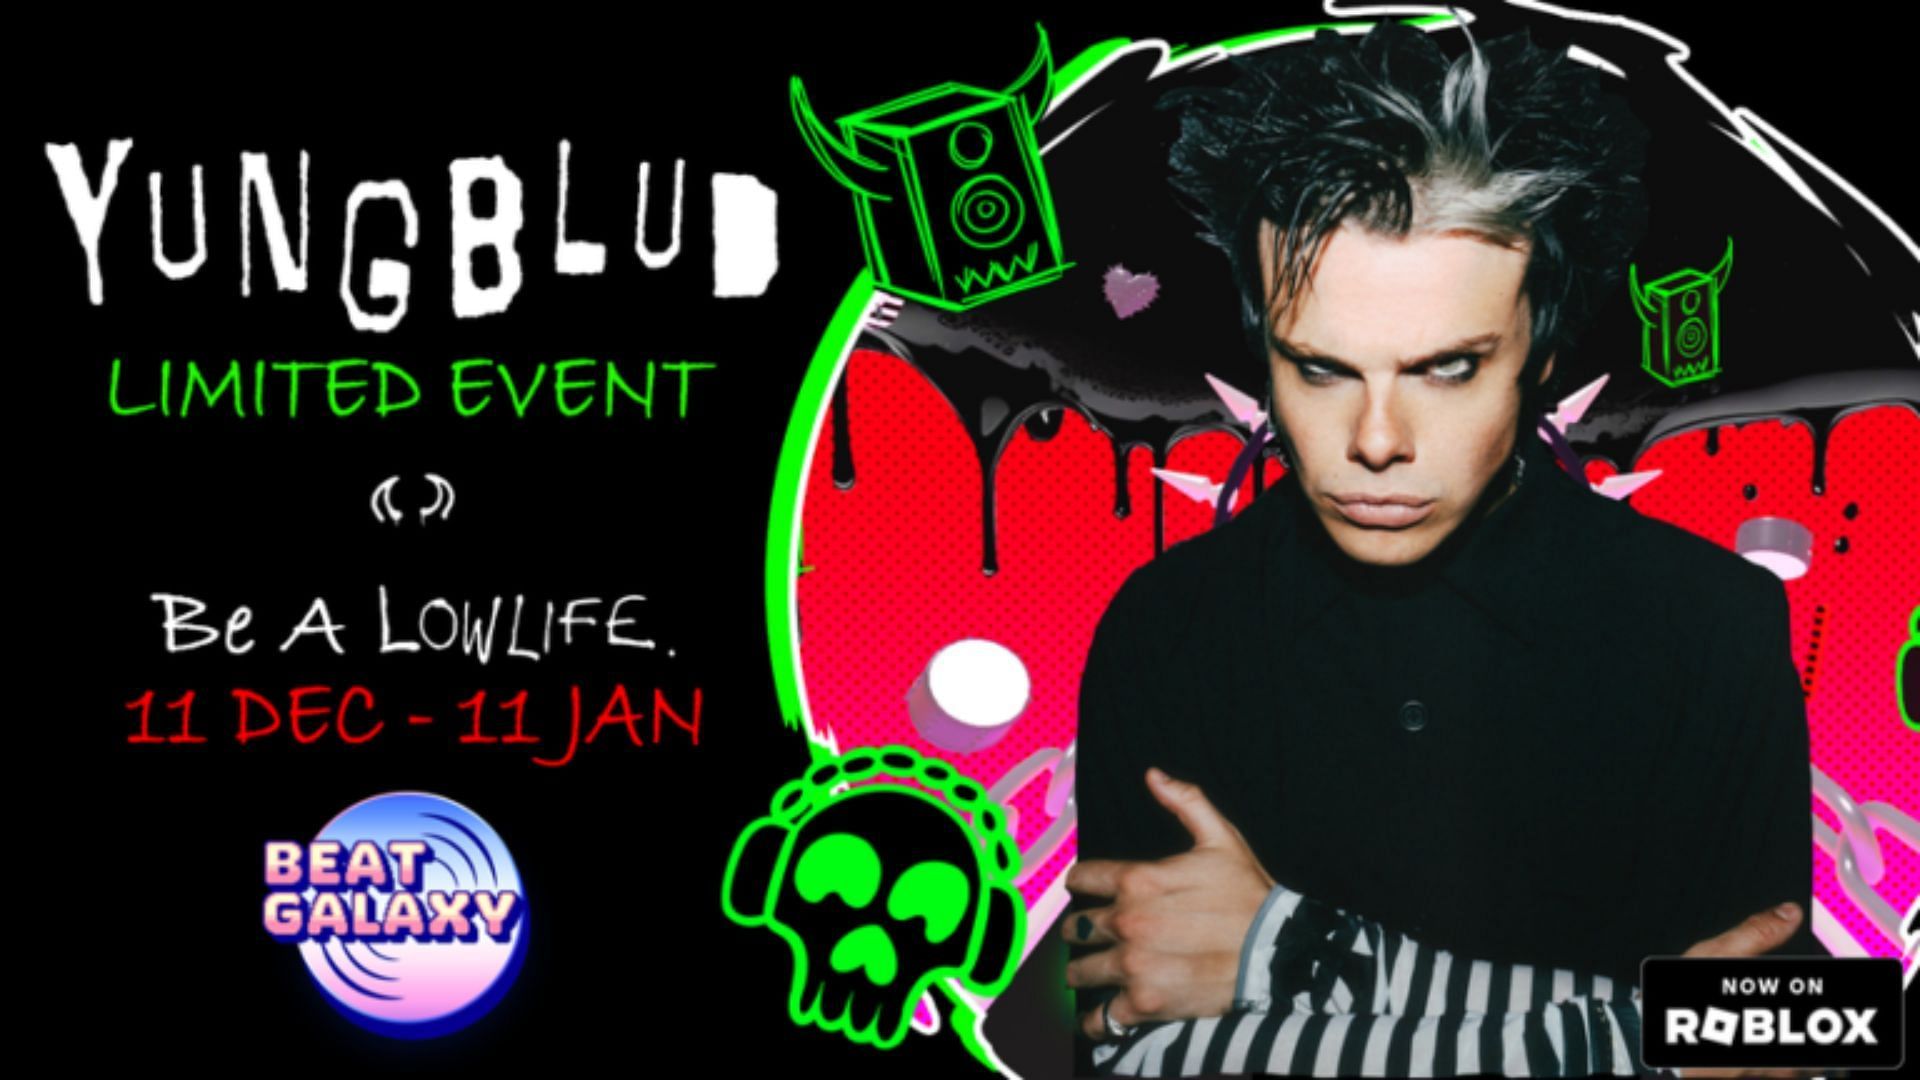 Official Yungblud event poster (Image via Beat Galaxy)